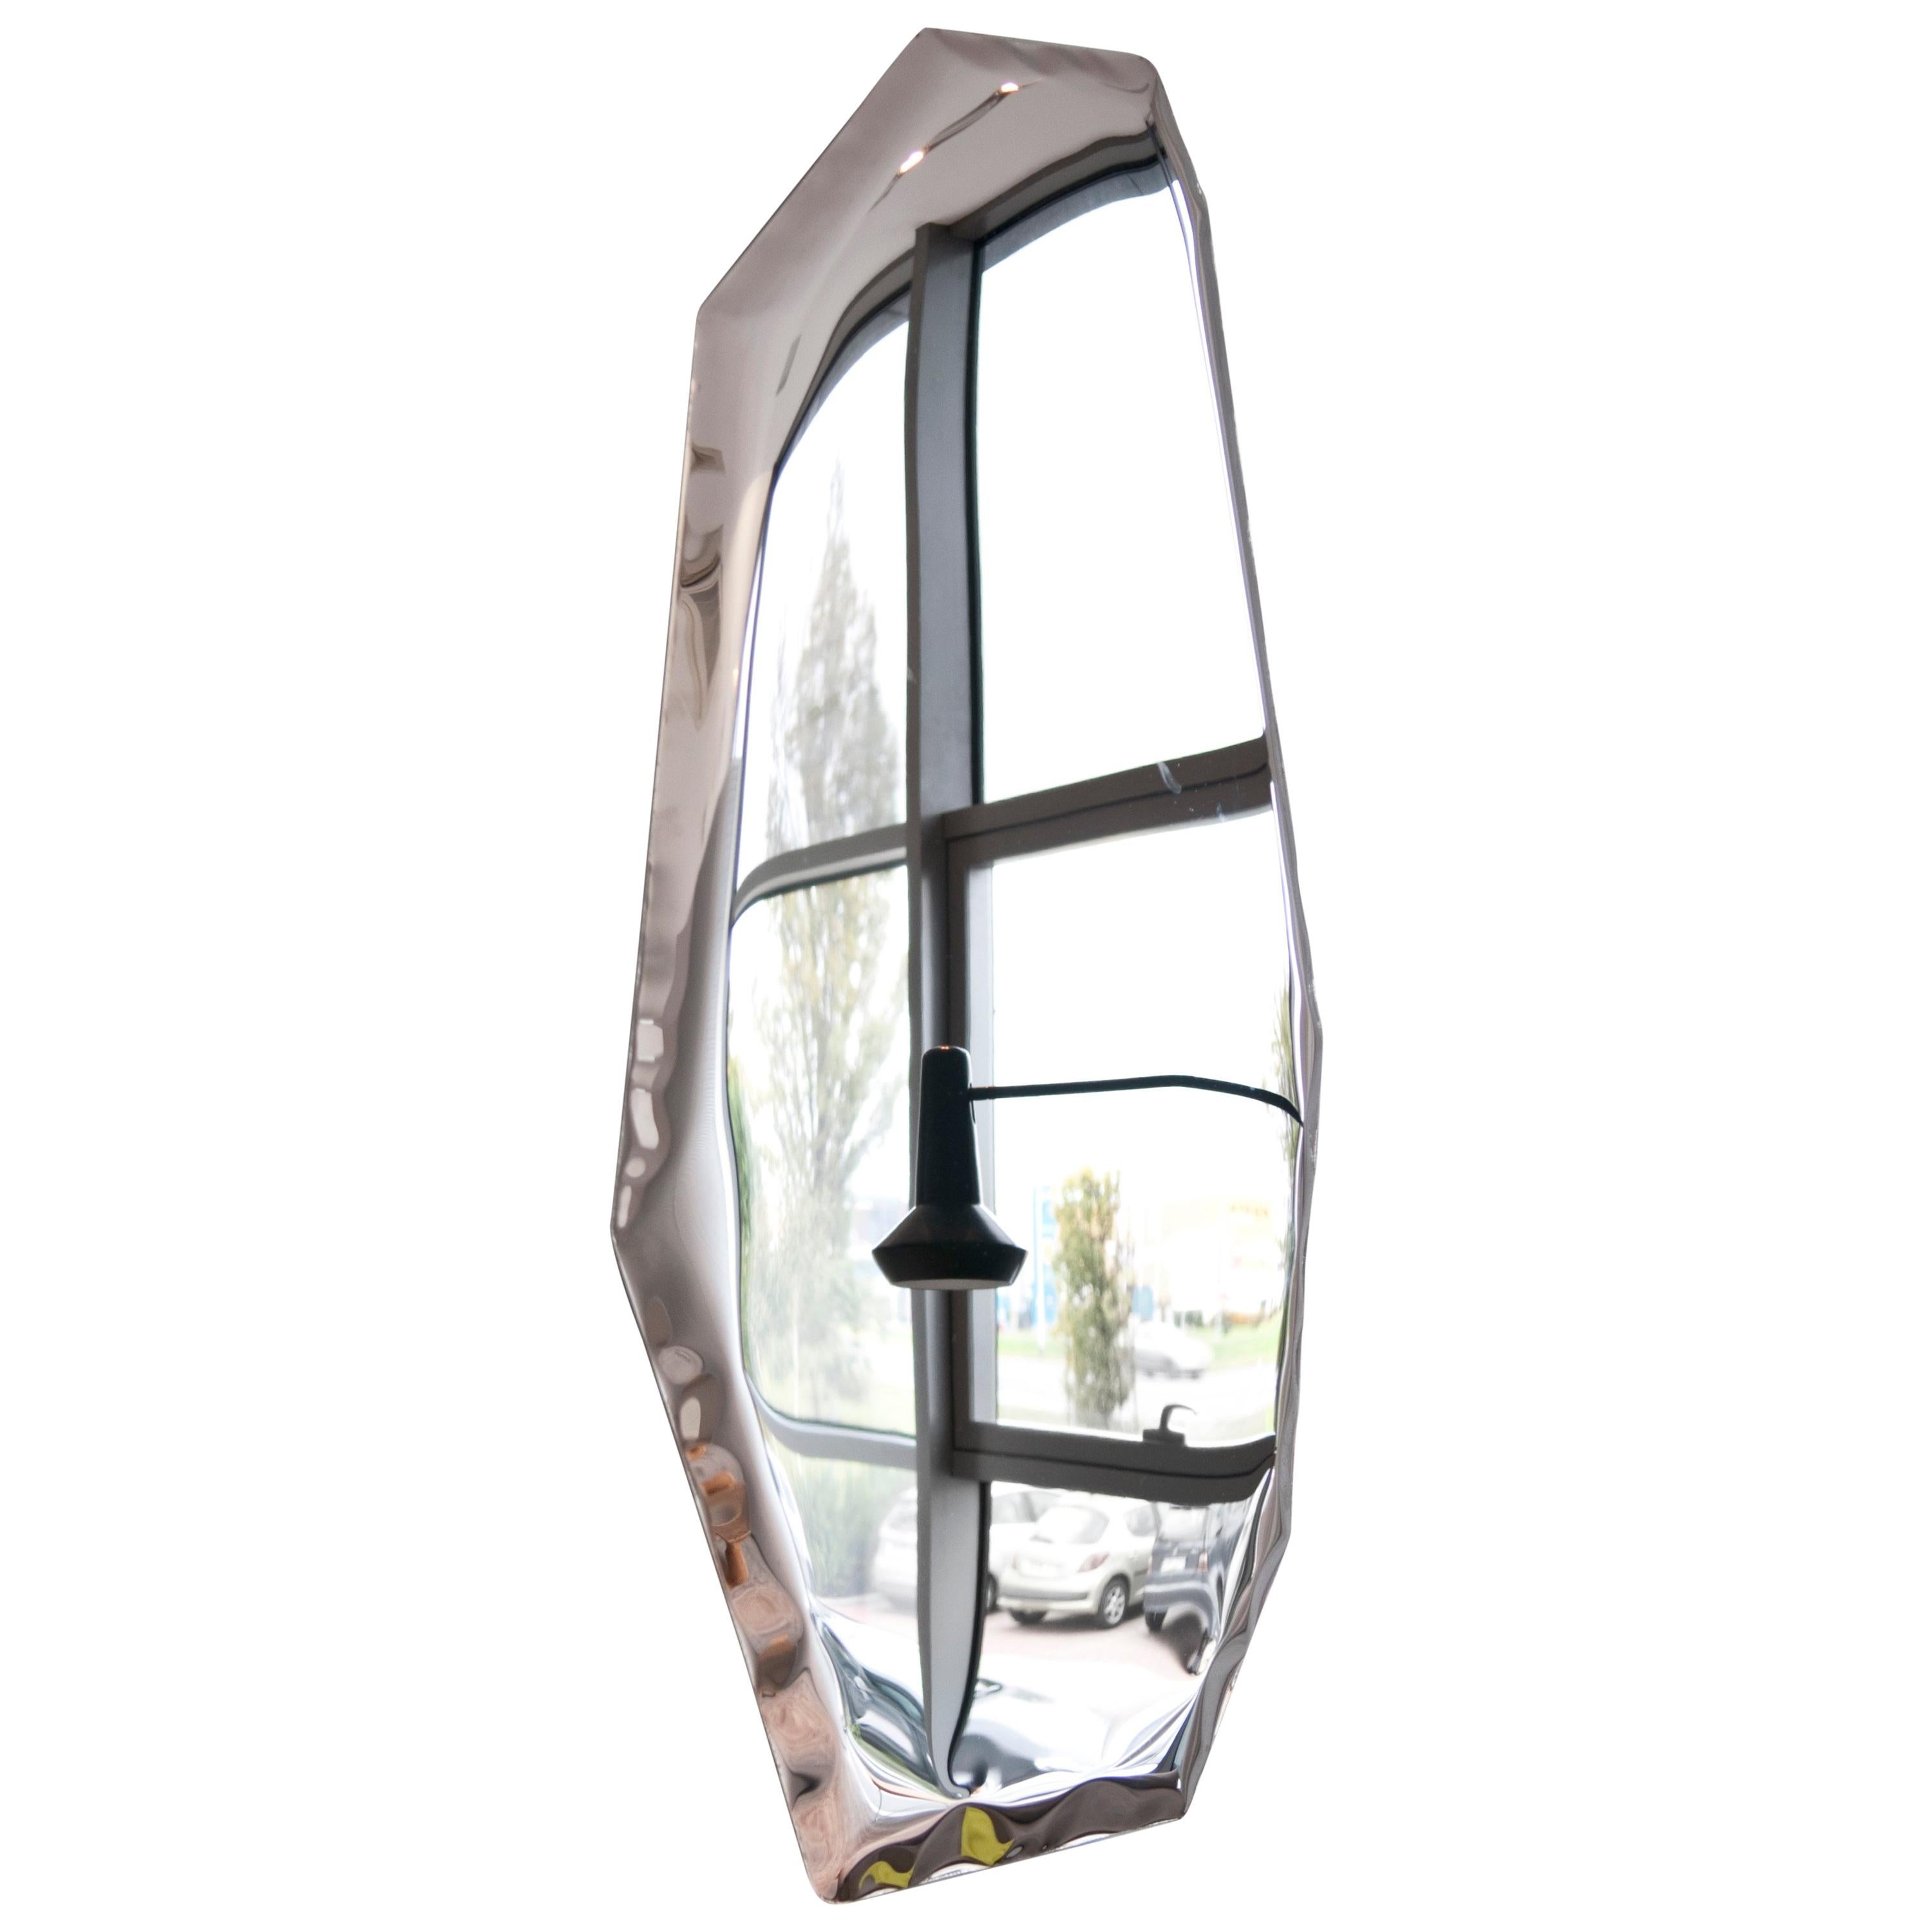 Mirror 'Tafla C4' in Polished Stainless Steel by Zieta For Sale